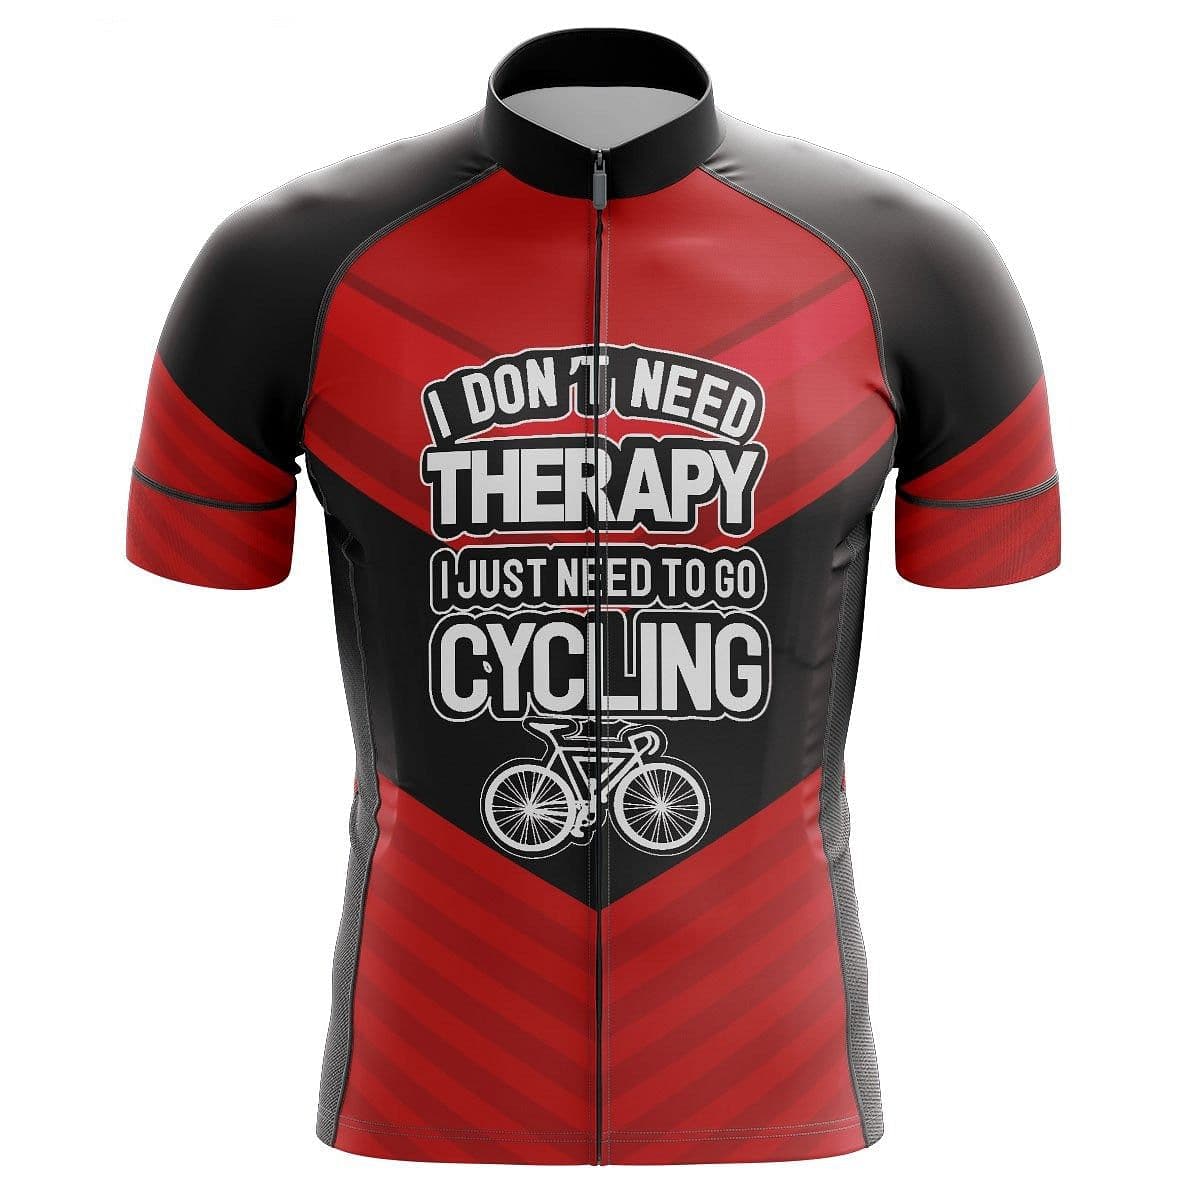 Men's No Need For Therapy Cycling Jersey.